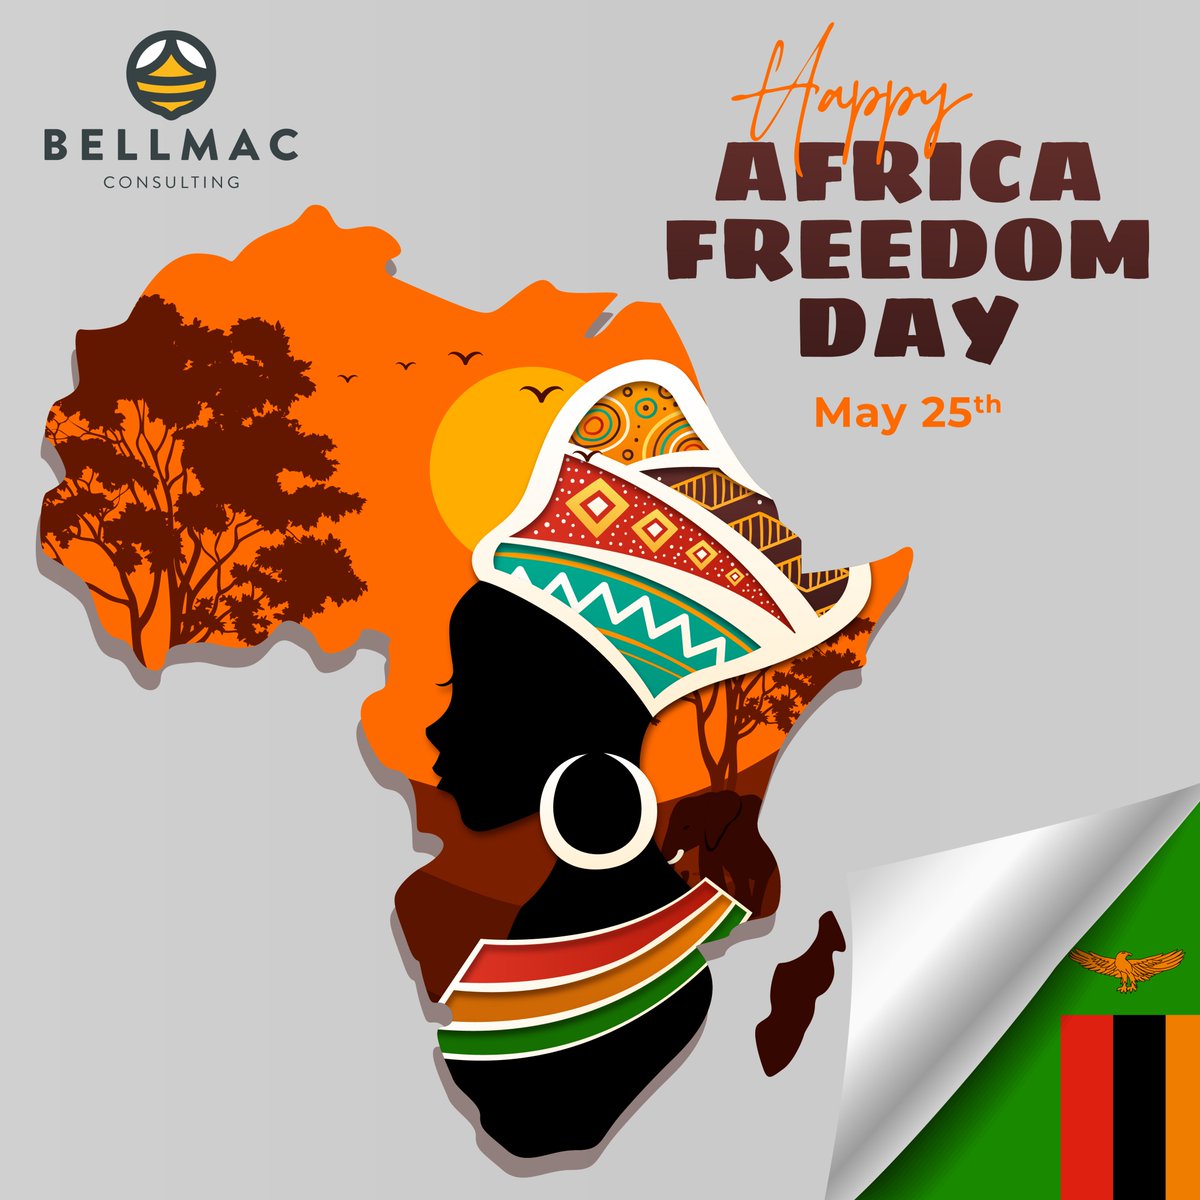 On Africa Freedom Day, we commemorate Zambia's journey to liberation and unity. Let us honor the brave individuals who fought for our independence and embrace the spirit of progress.  🇿🇲✨ #AfricaFreedomDay #ZambiaProud #africaday2023 #zambia #africa